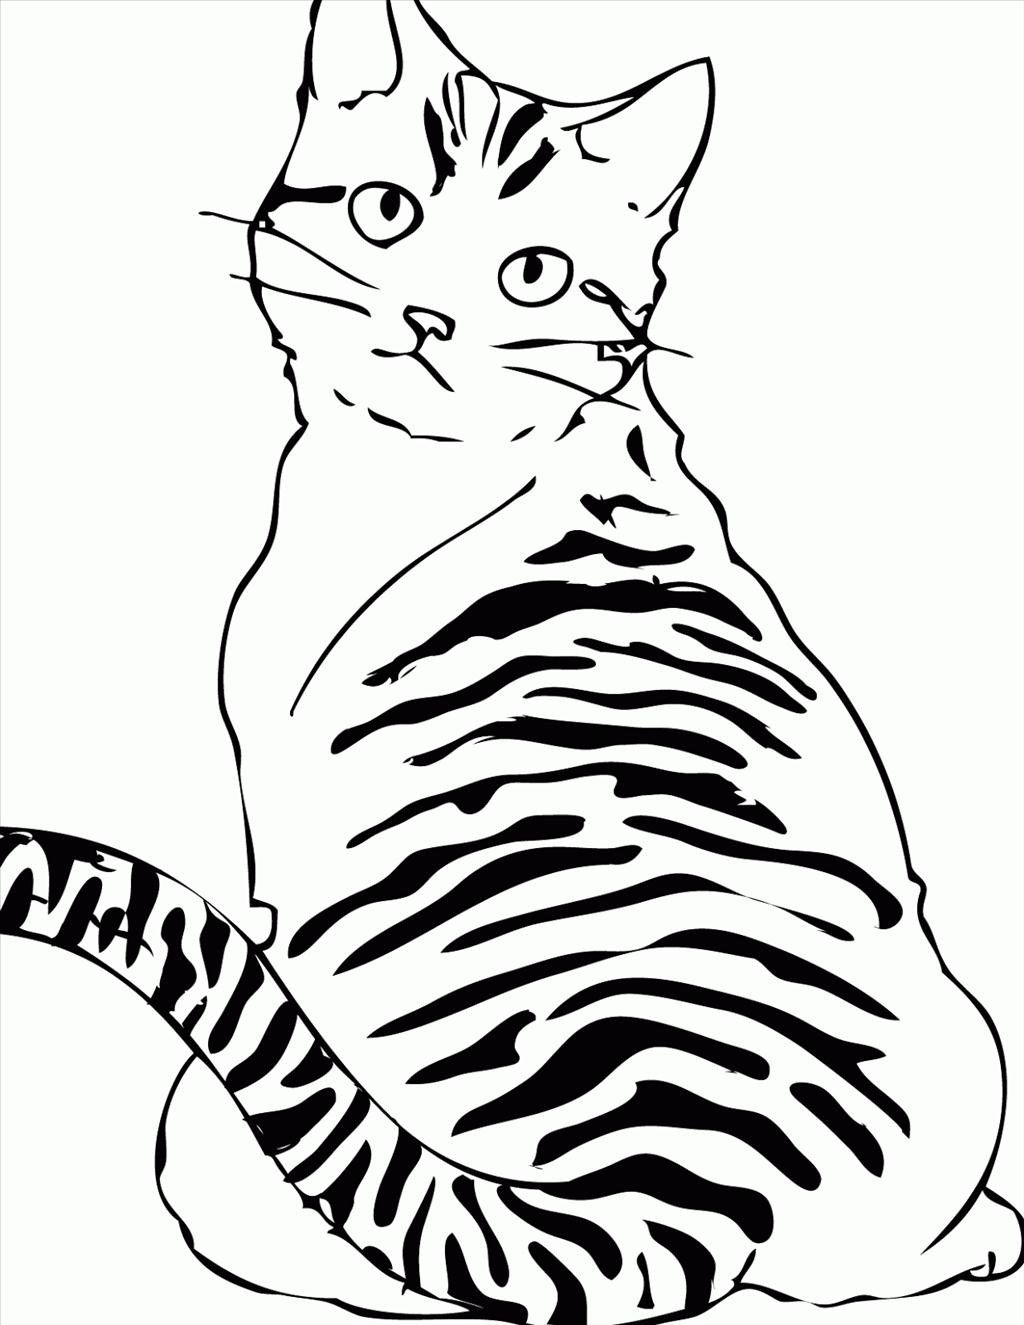 Tabby Cat Coloring Pages at GetColorings.com | Free printable colorings ...